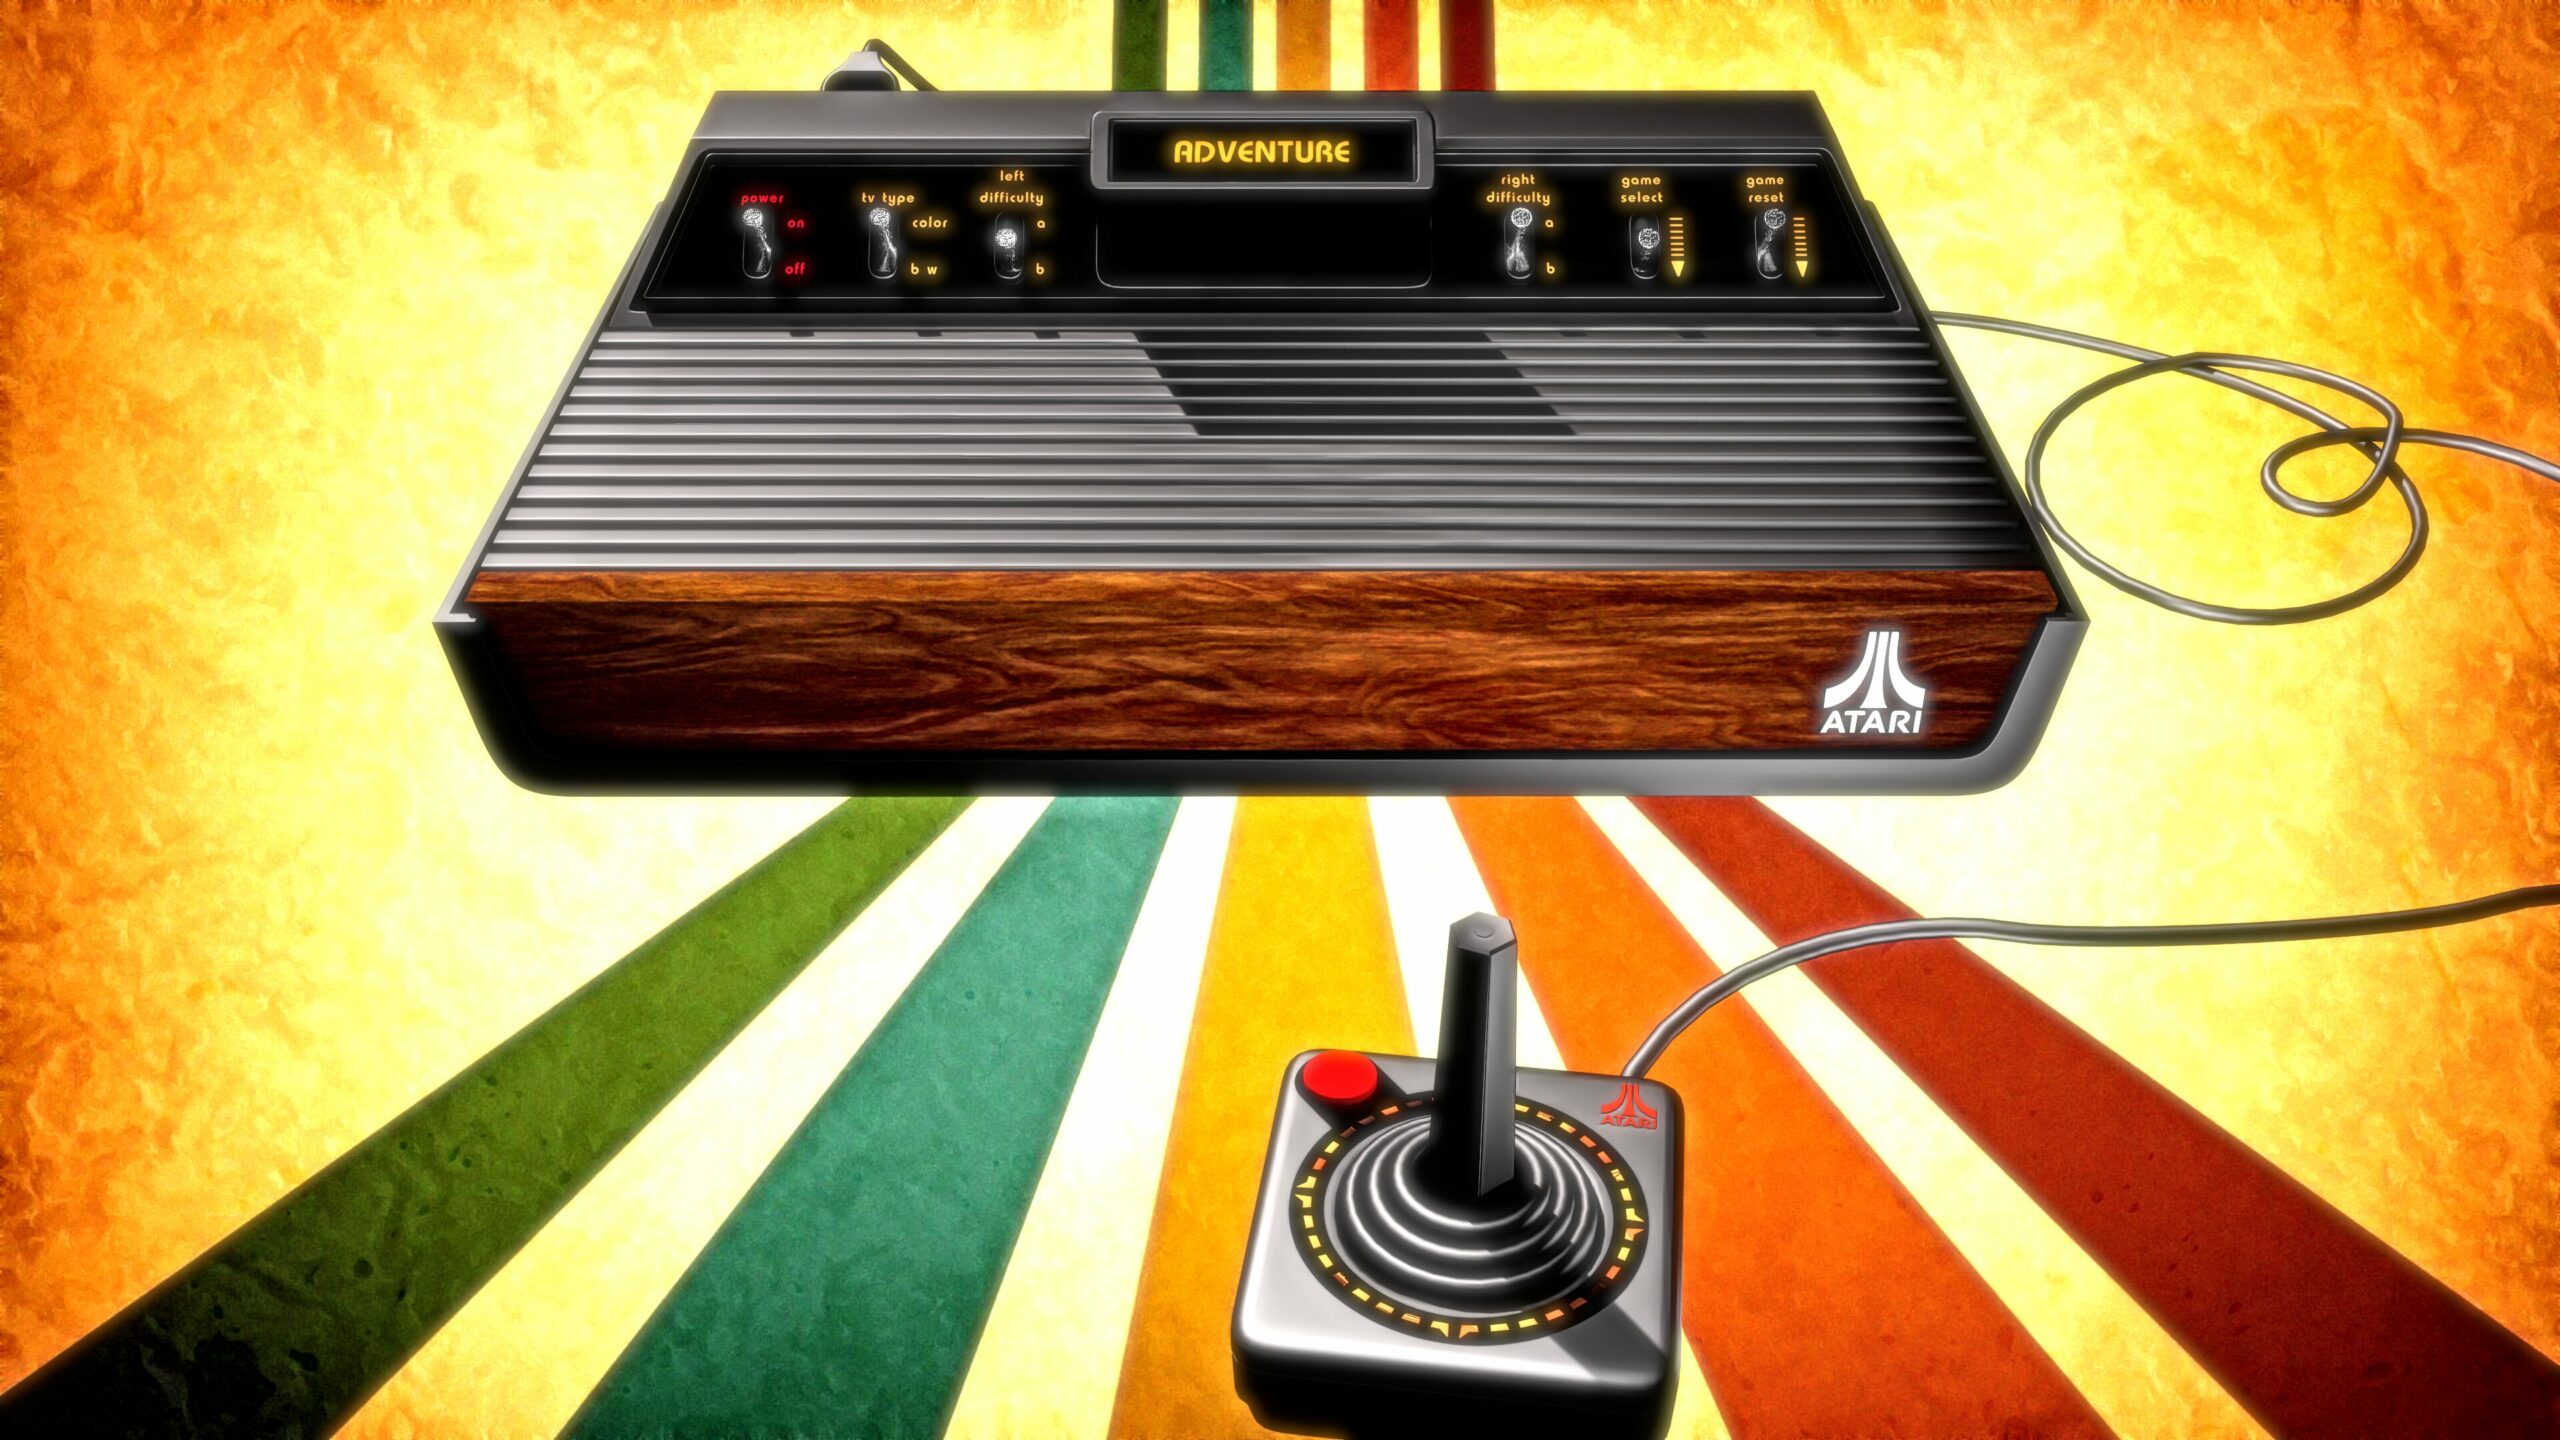 Atari 2600 game console poster with retro 1970s brown art